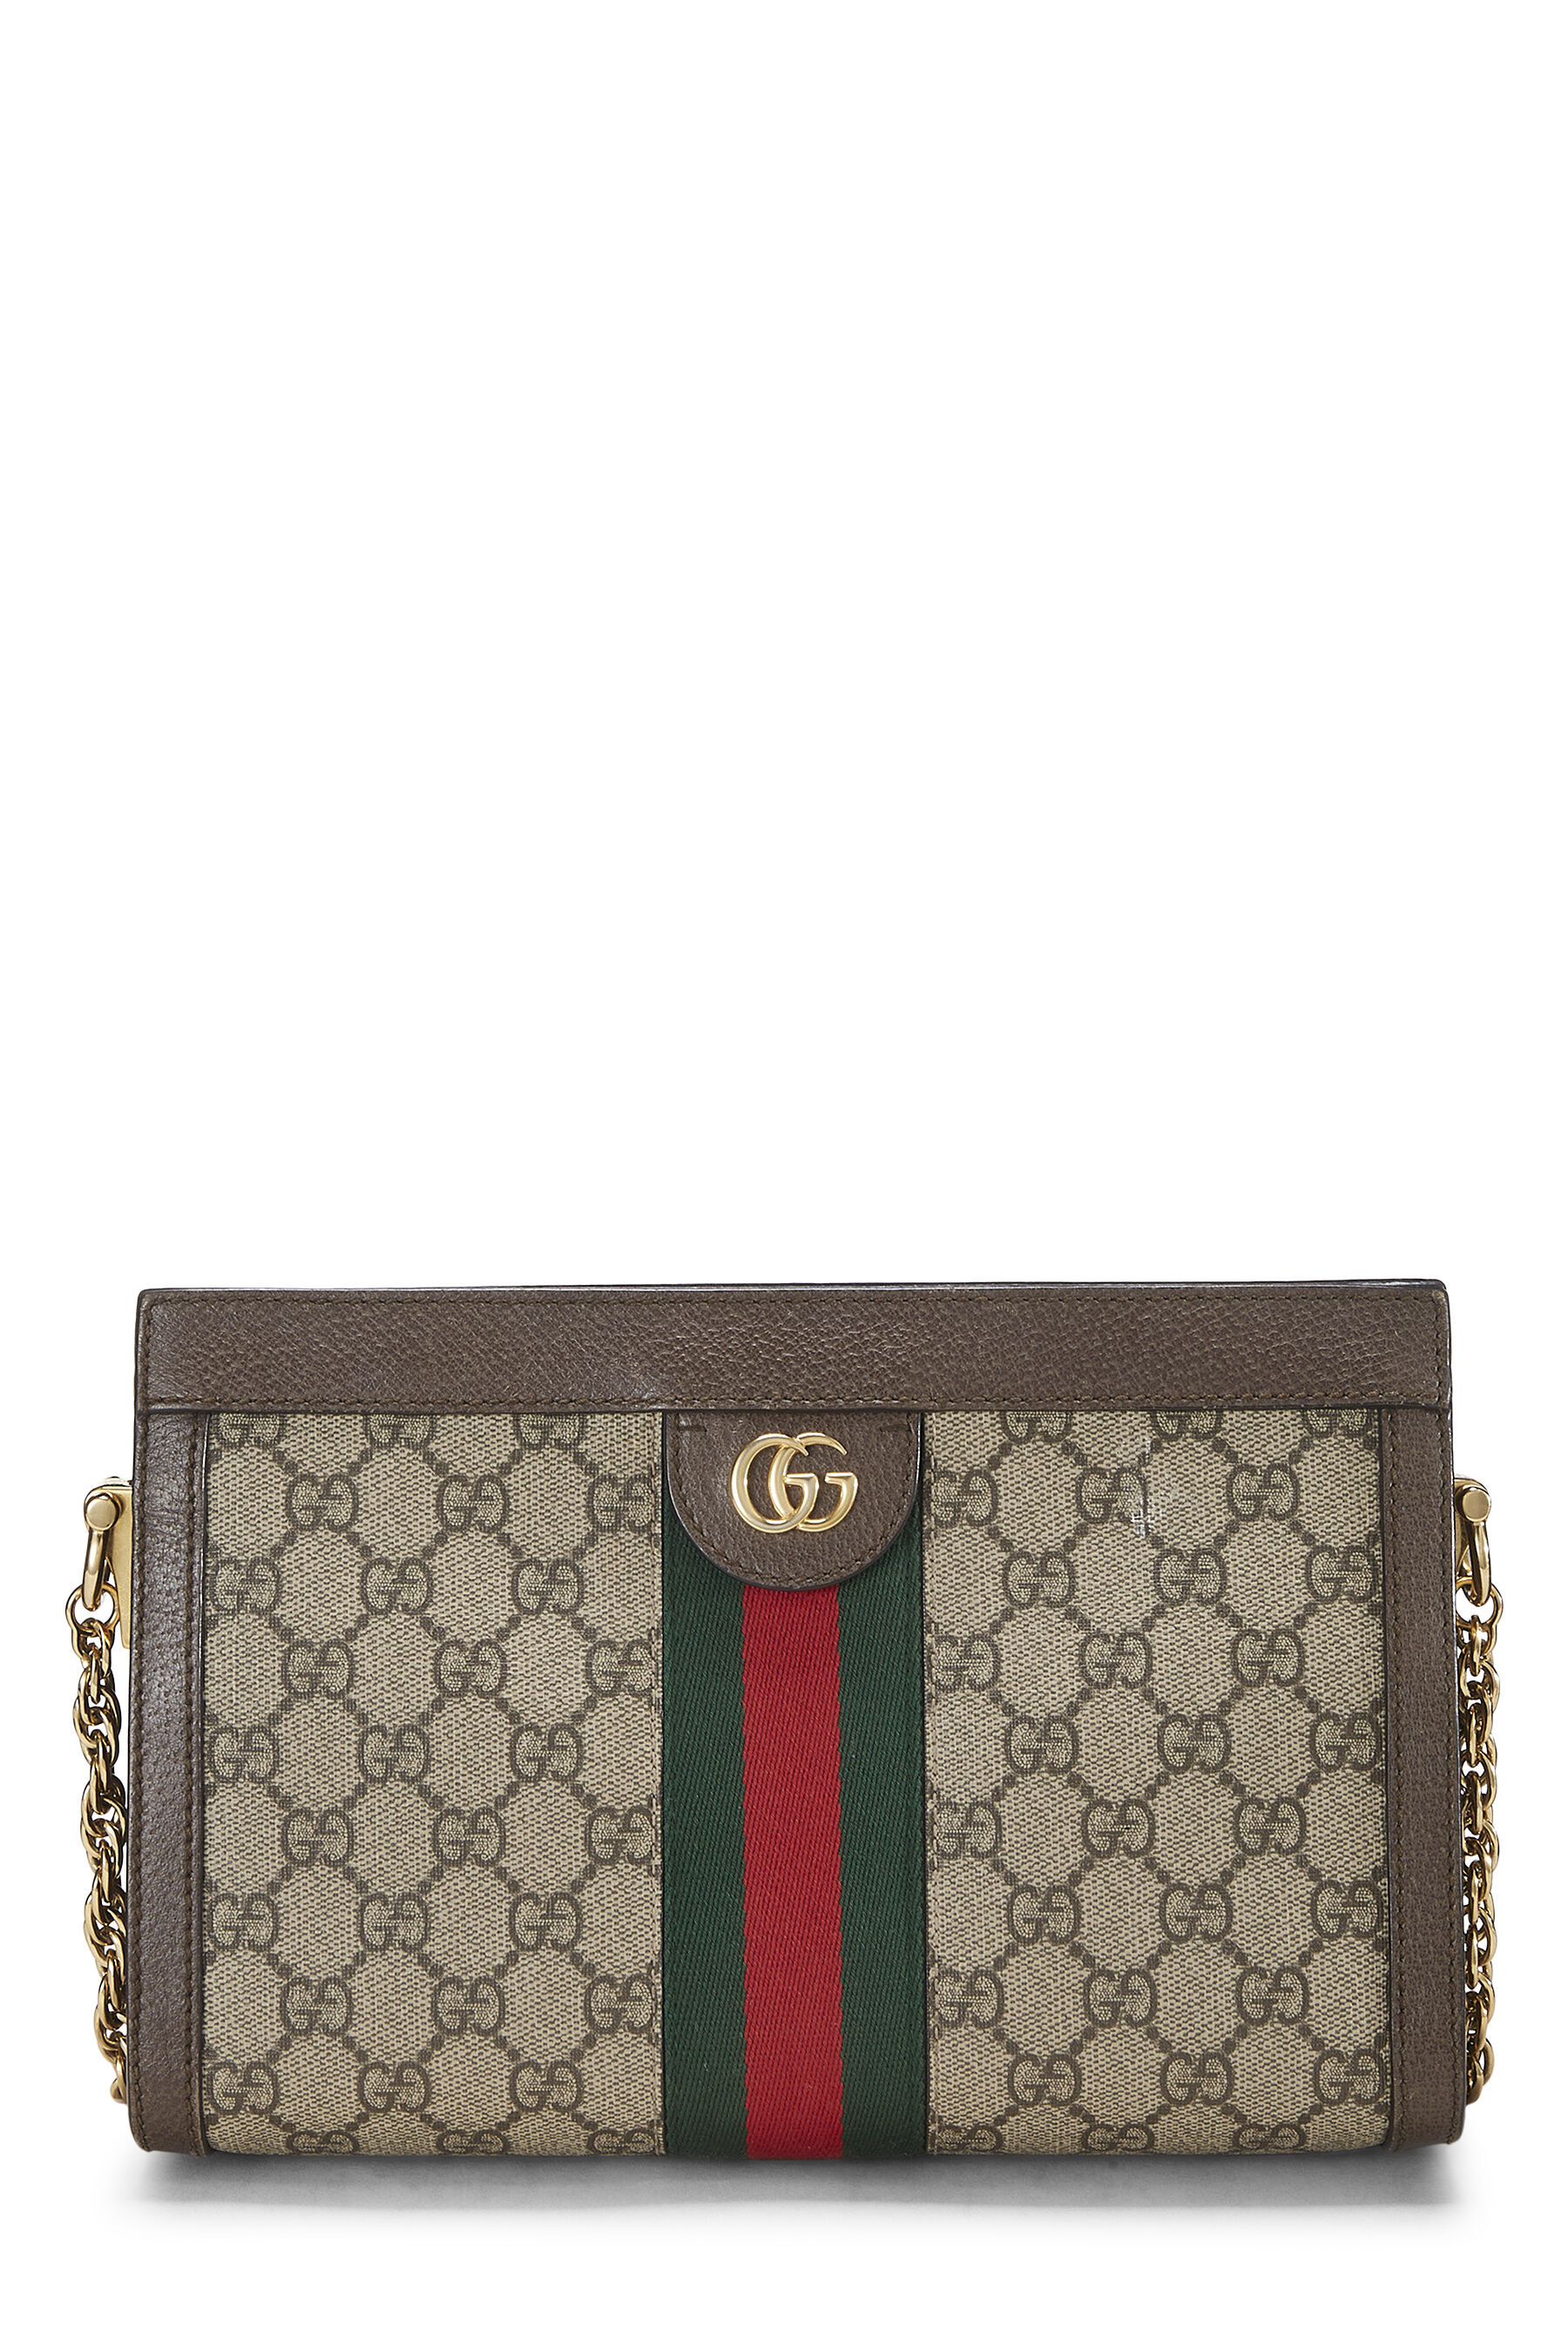 Gucci gg Supreme Shoulder Bag Brown With Leather India | Ubuy